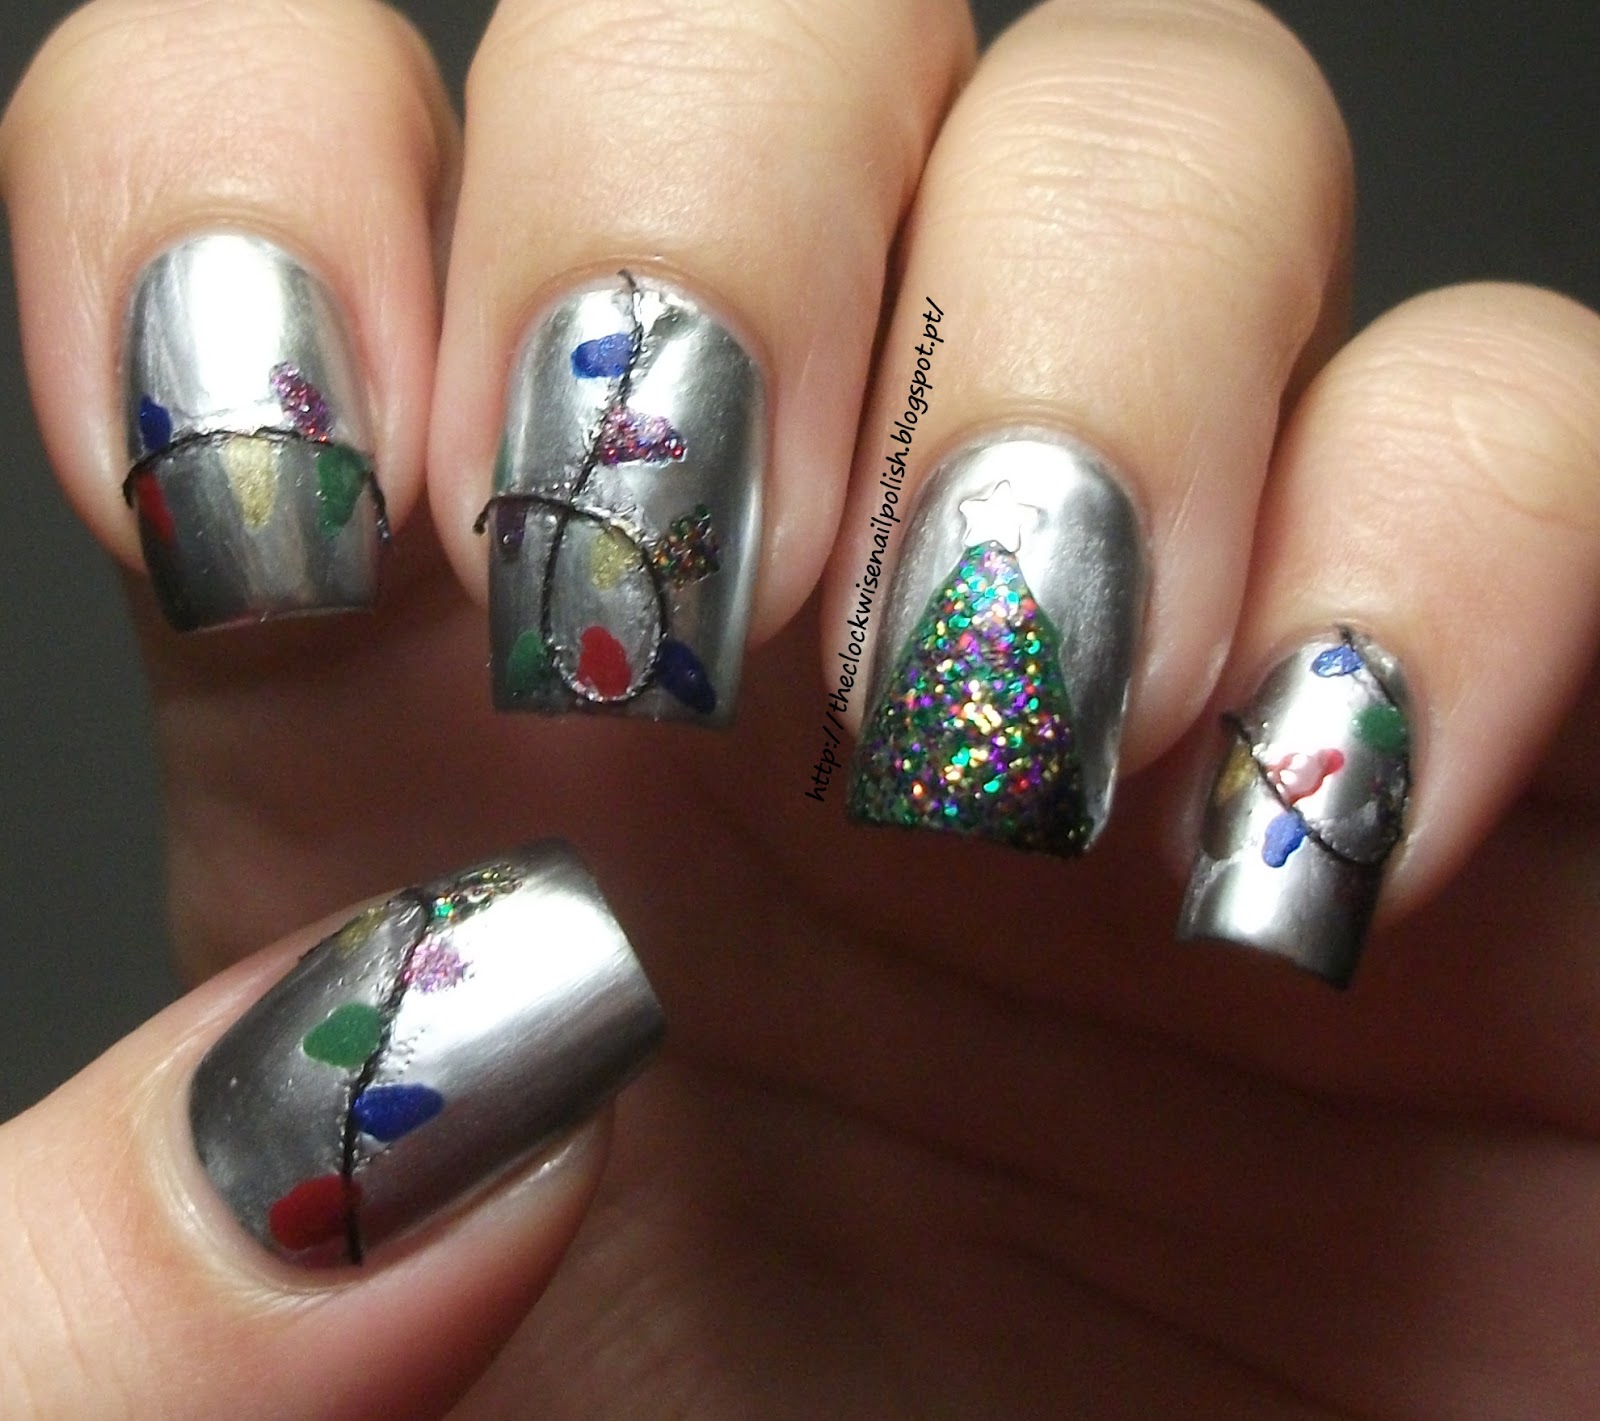 The Clockwise Nail Polish: Winter Holiday Challenge: Festival of Lights